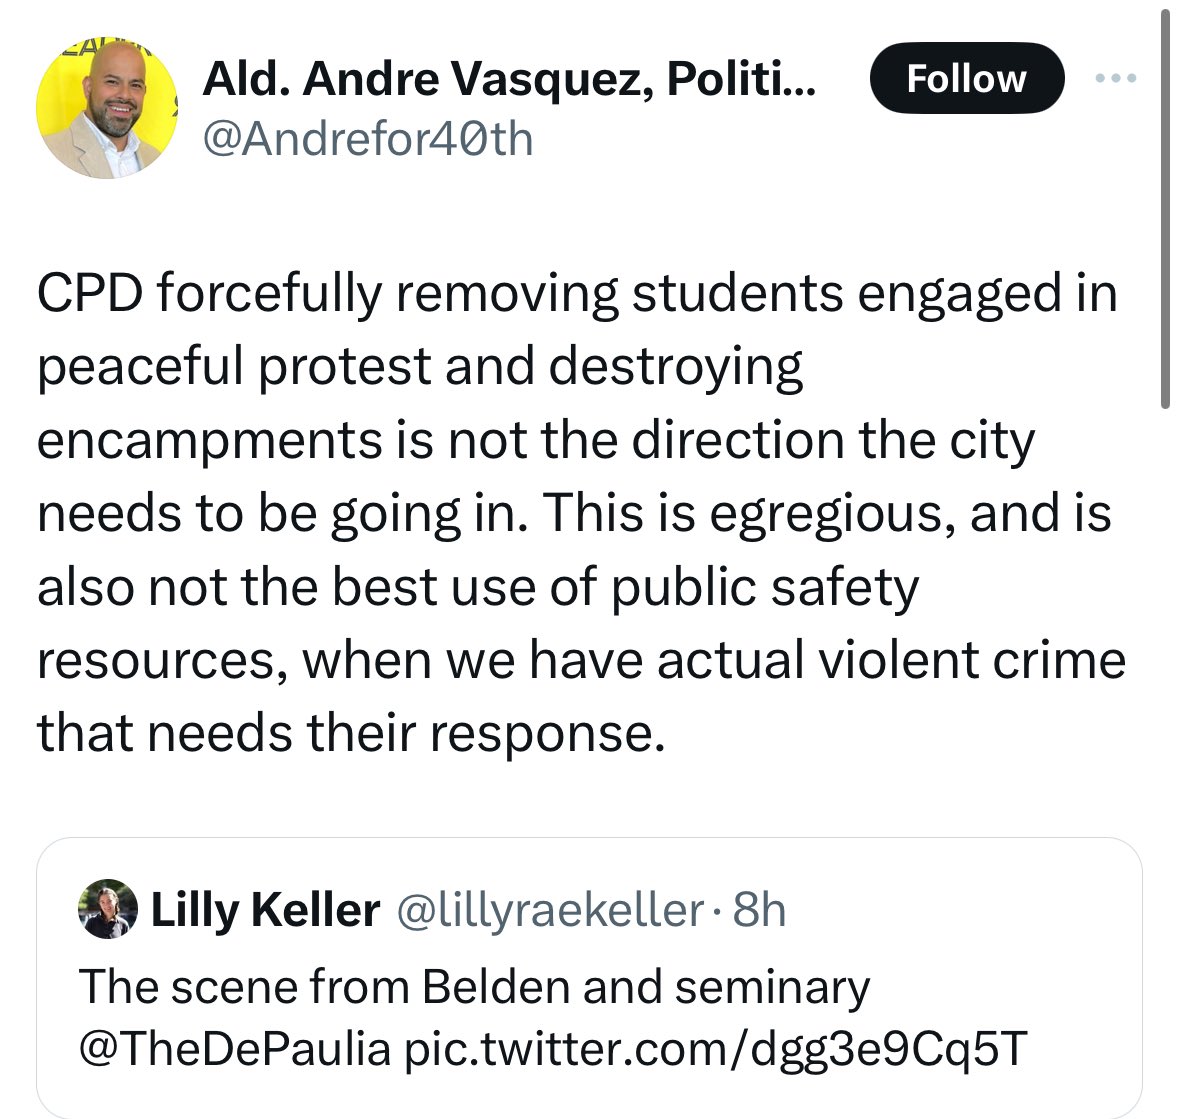 “Not the best use of public safety resources” is having protests multiple times a week, blocking roads and high traffic highways, blocking access to the airport, disrupting graduations and other events, etc. But, @Andrefor40th, let’s pretend that getting rid of the problem is